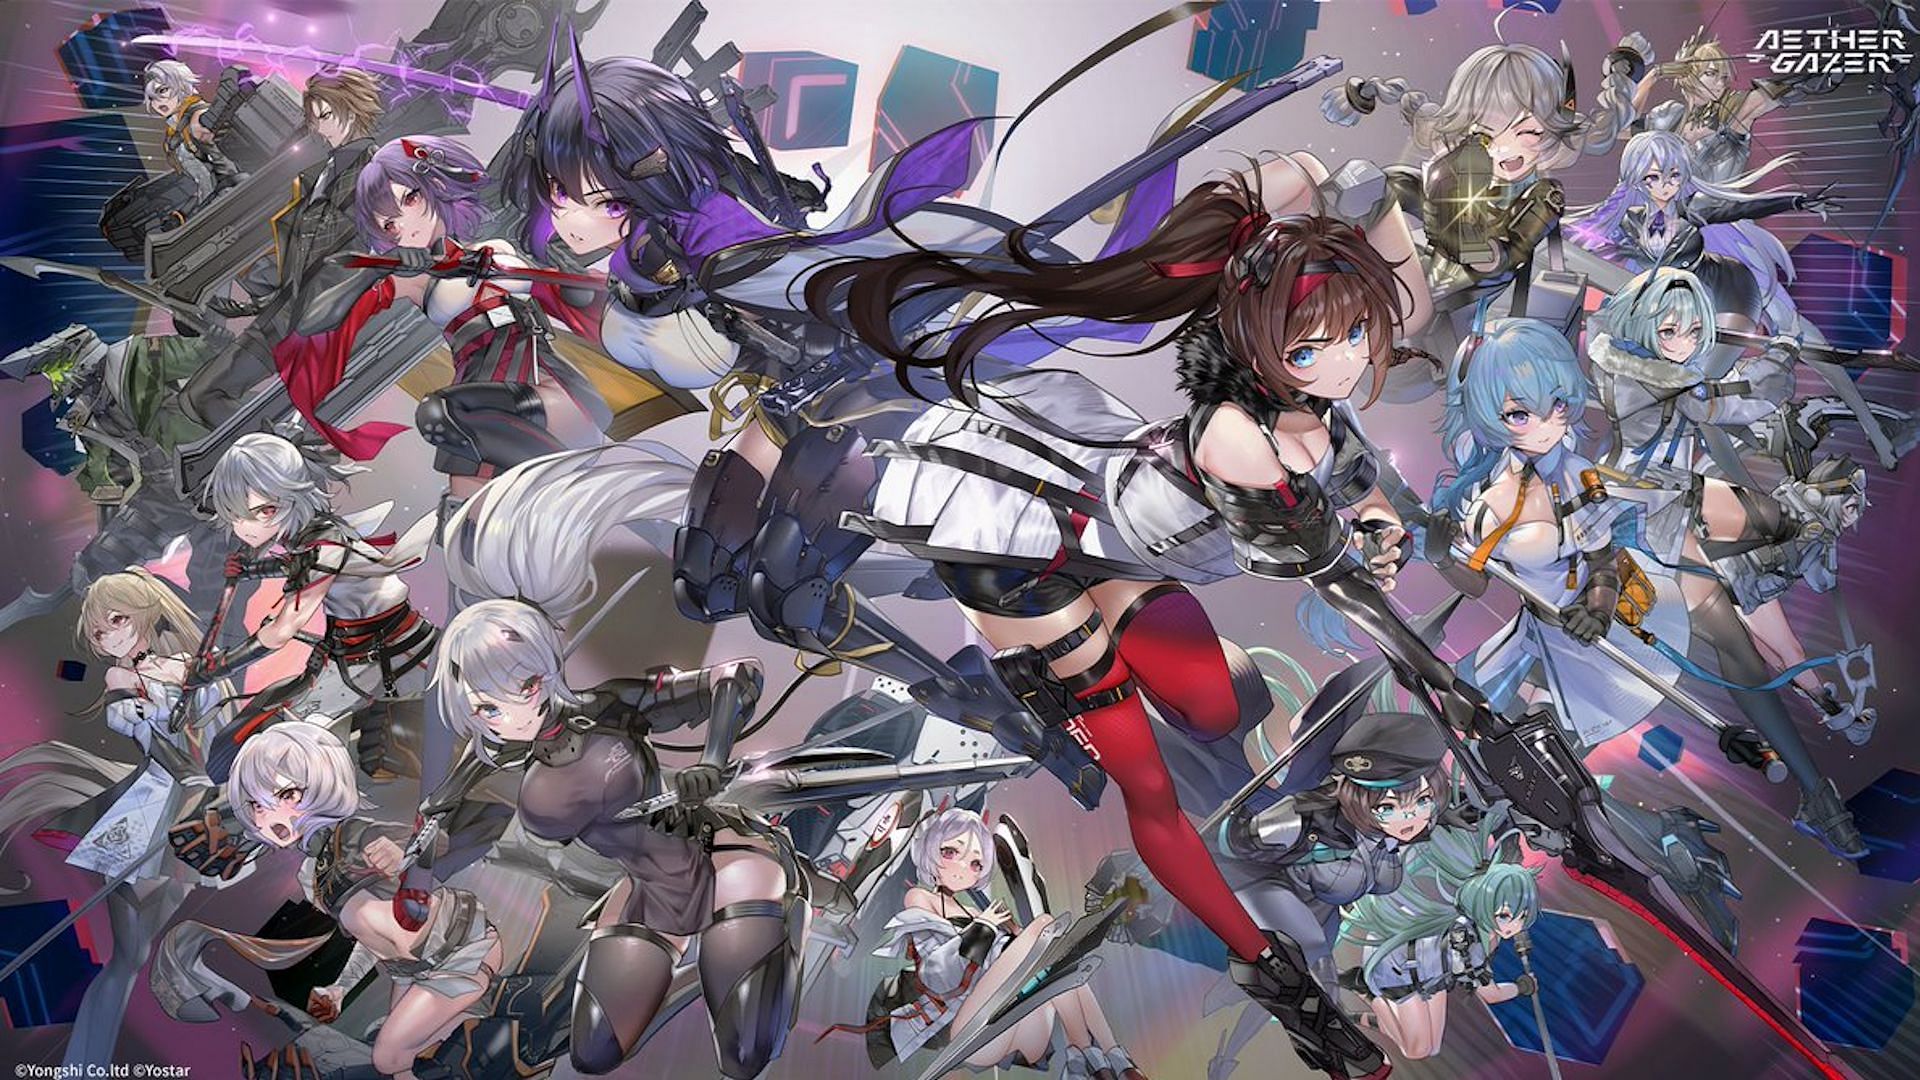 A promotional image for this new mobile game featuring many of its characters